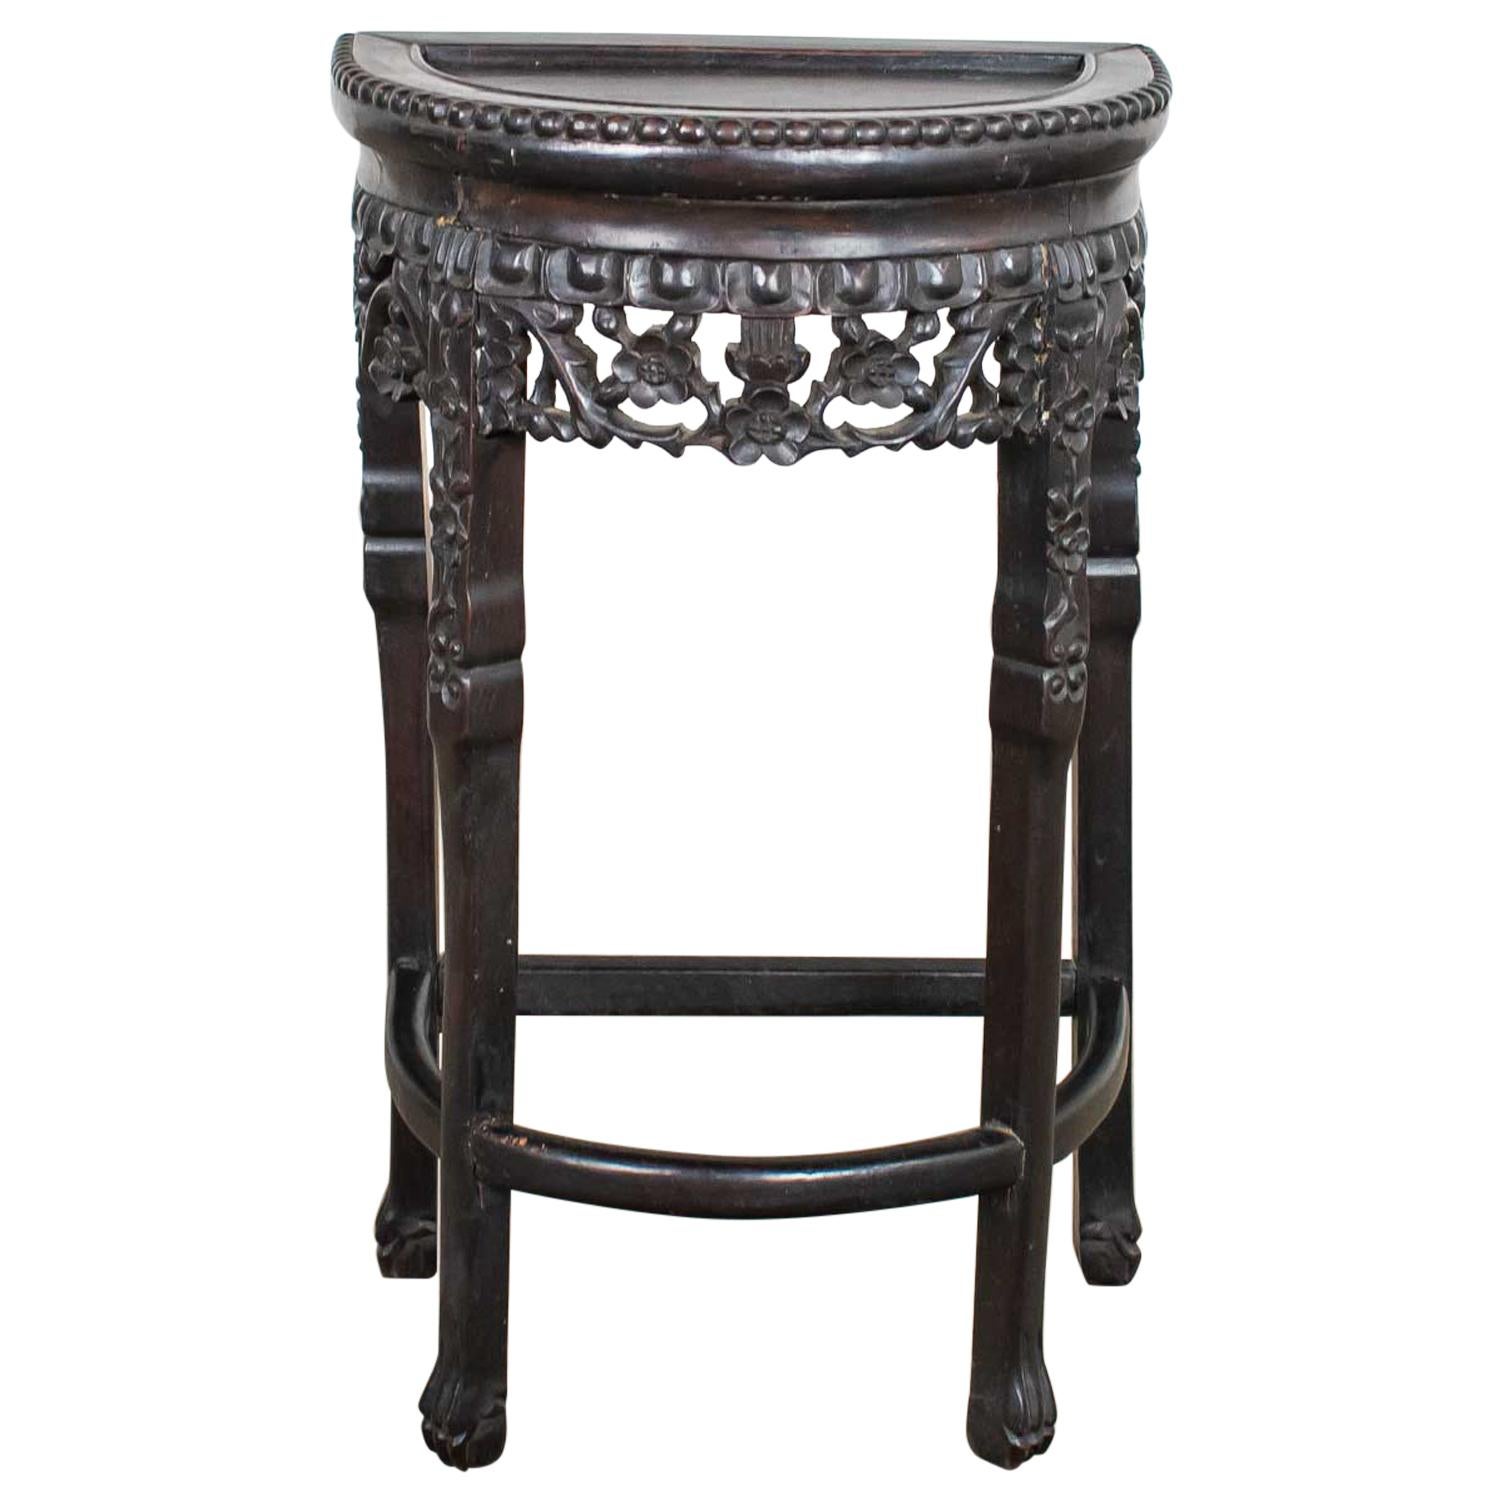 Vintage Asian Half-Moon Console Table Side Table Demilune Table or Stand